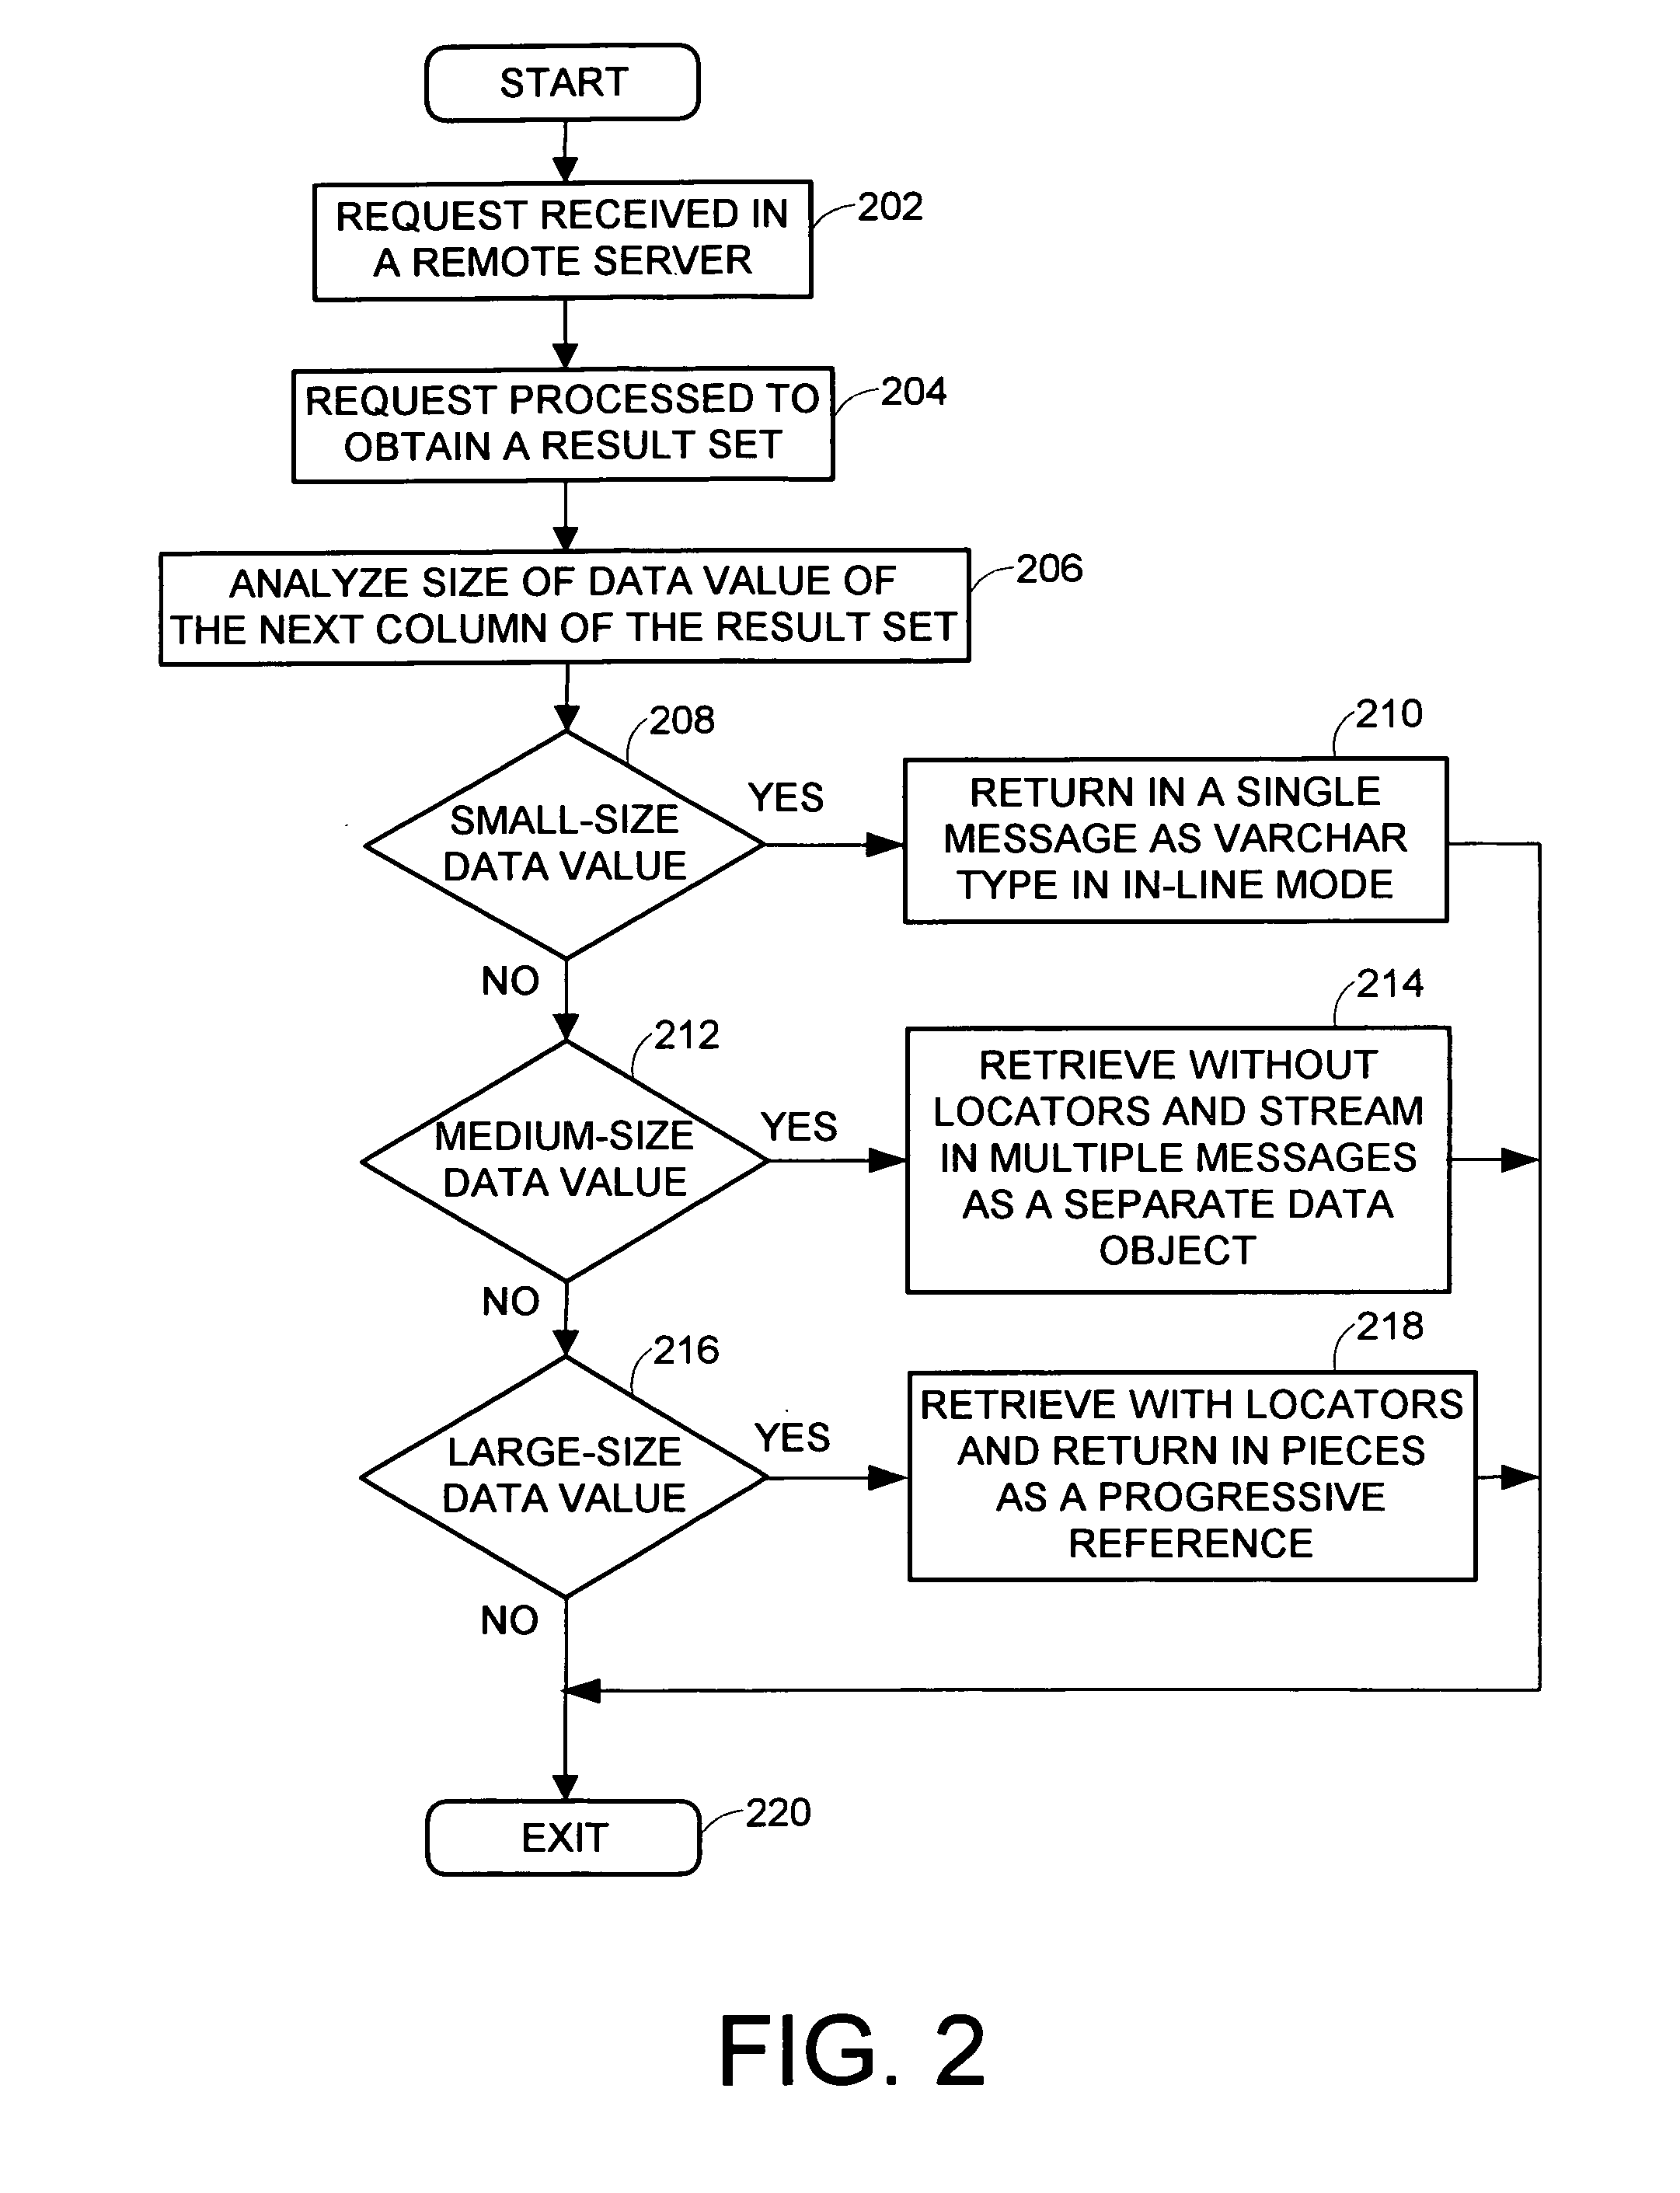 Dynamic data formatting during transmittal of generalized byte strings, such as XML or large objects, across a network